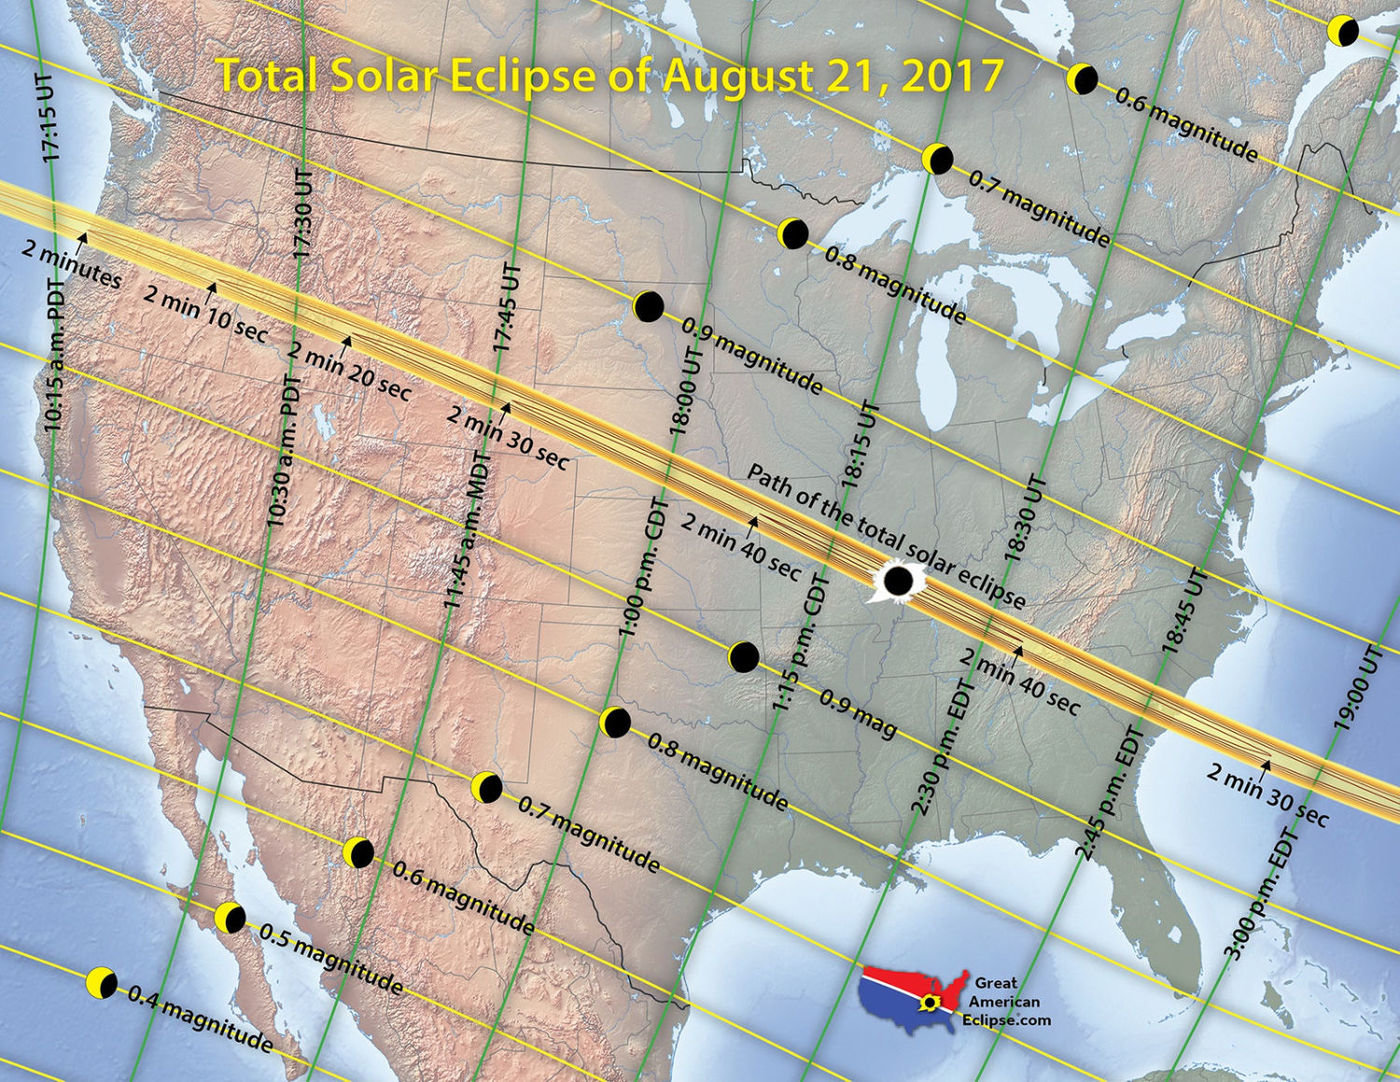 The total solar eclipse of 2017's path of totality, stretching from Oregon to South Carolina.